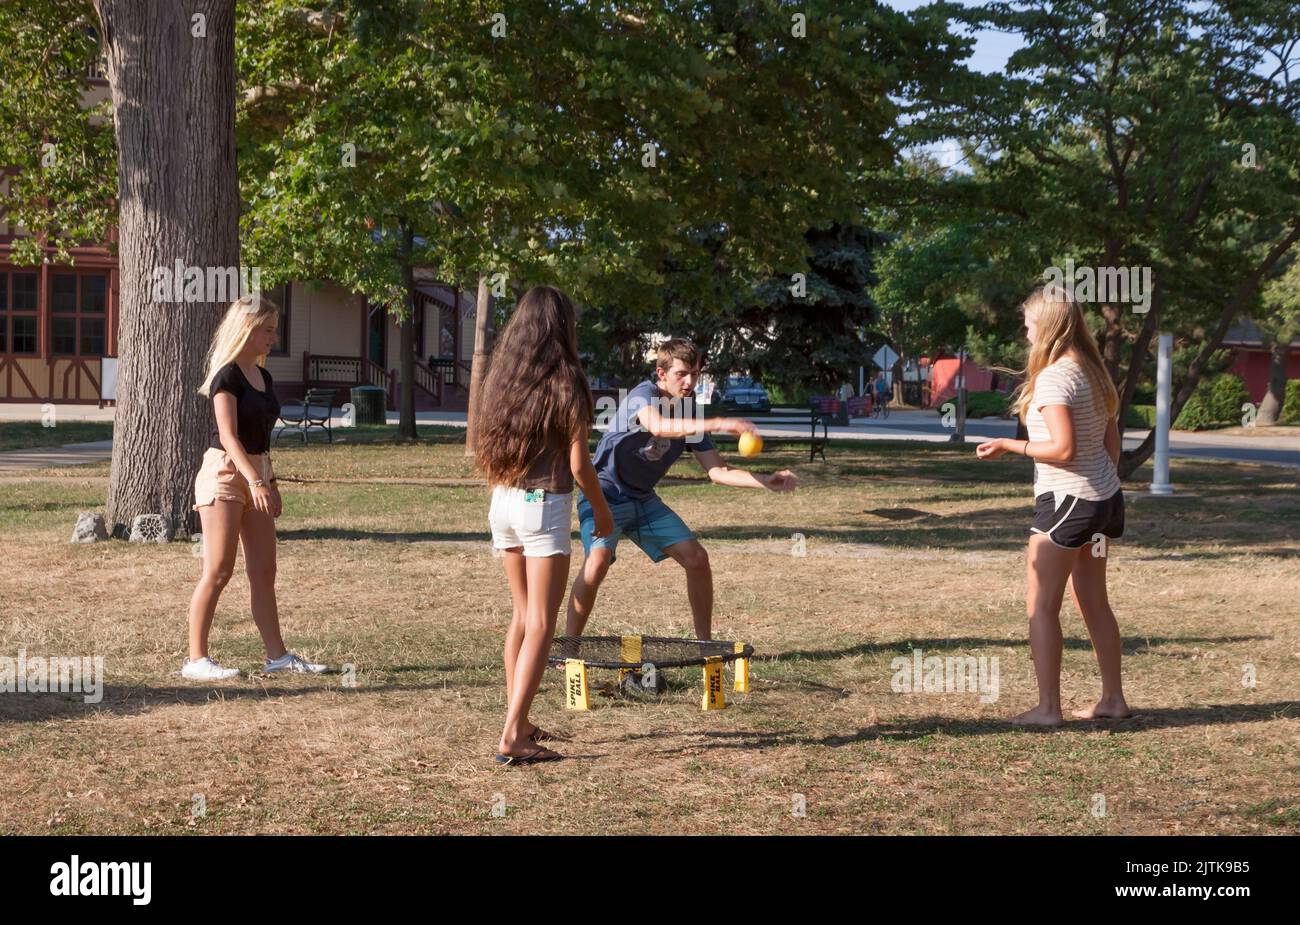 Four young mixed adults playing the Roundnet sport game of Spikeball outdoors. Stock Photo